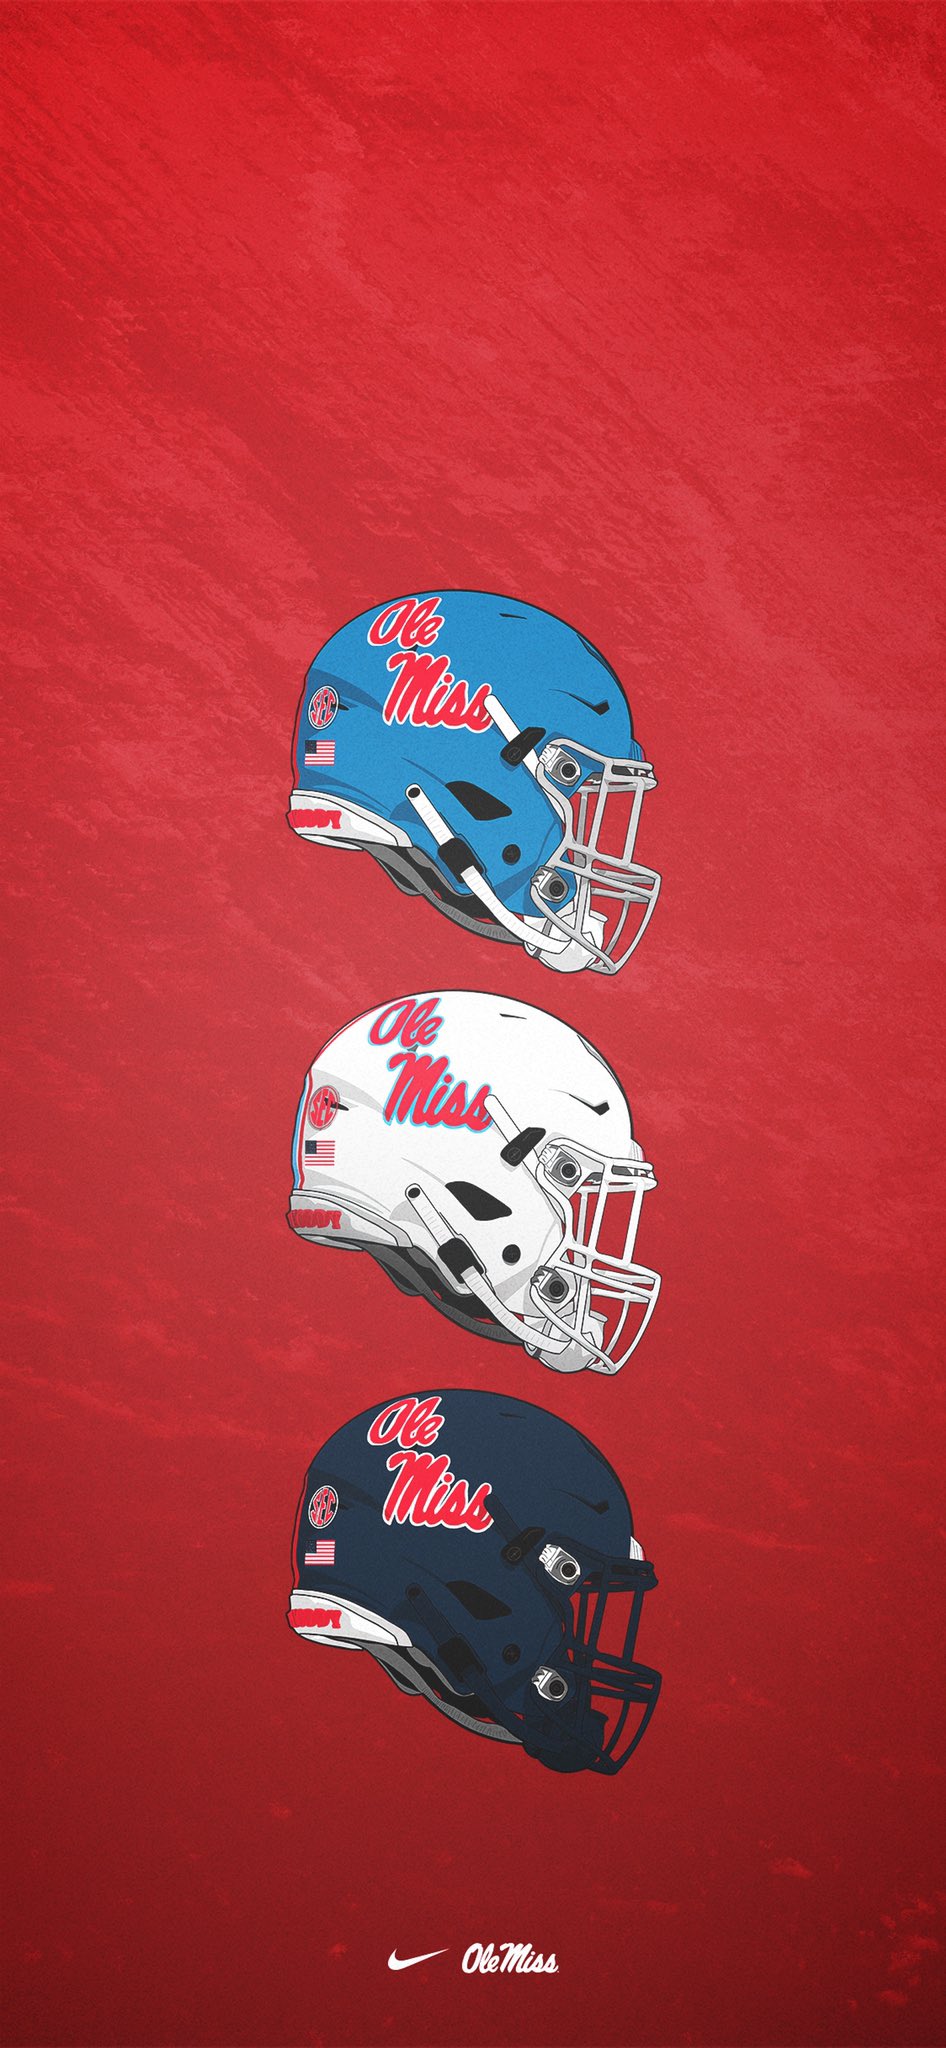 Ole miss football on protect your screen with the best helmets in college football ð wallpaperwednesday httpstcogybvrm